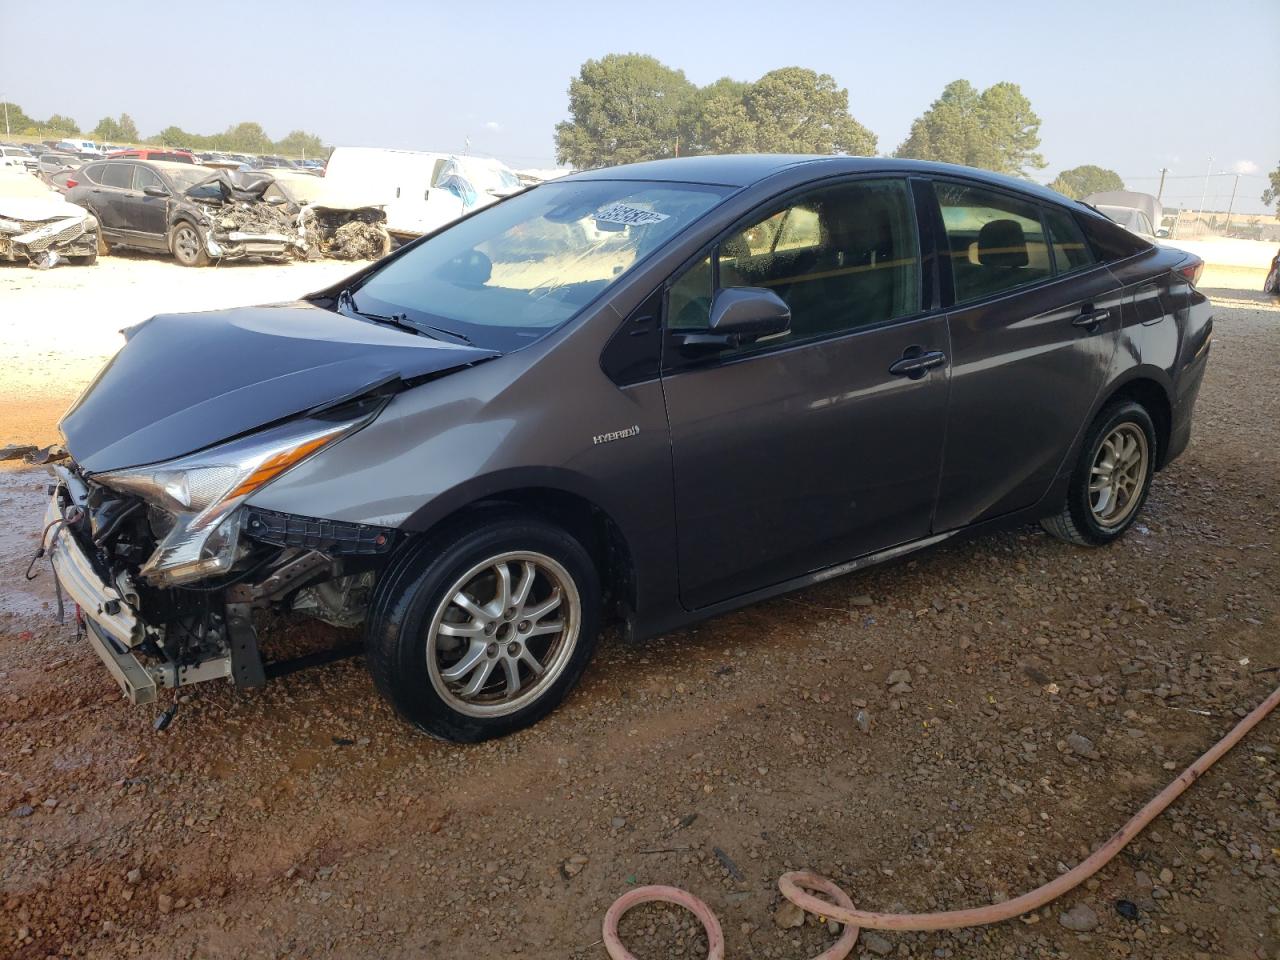 JTDKBRFUXJ3****** Salvage and Wrecked 2018 Toyota Prius in AL - Tanner